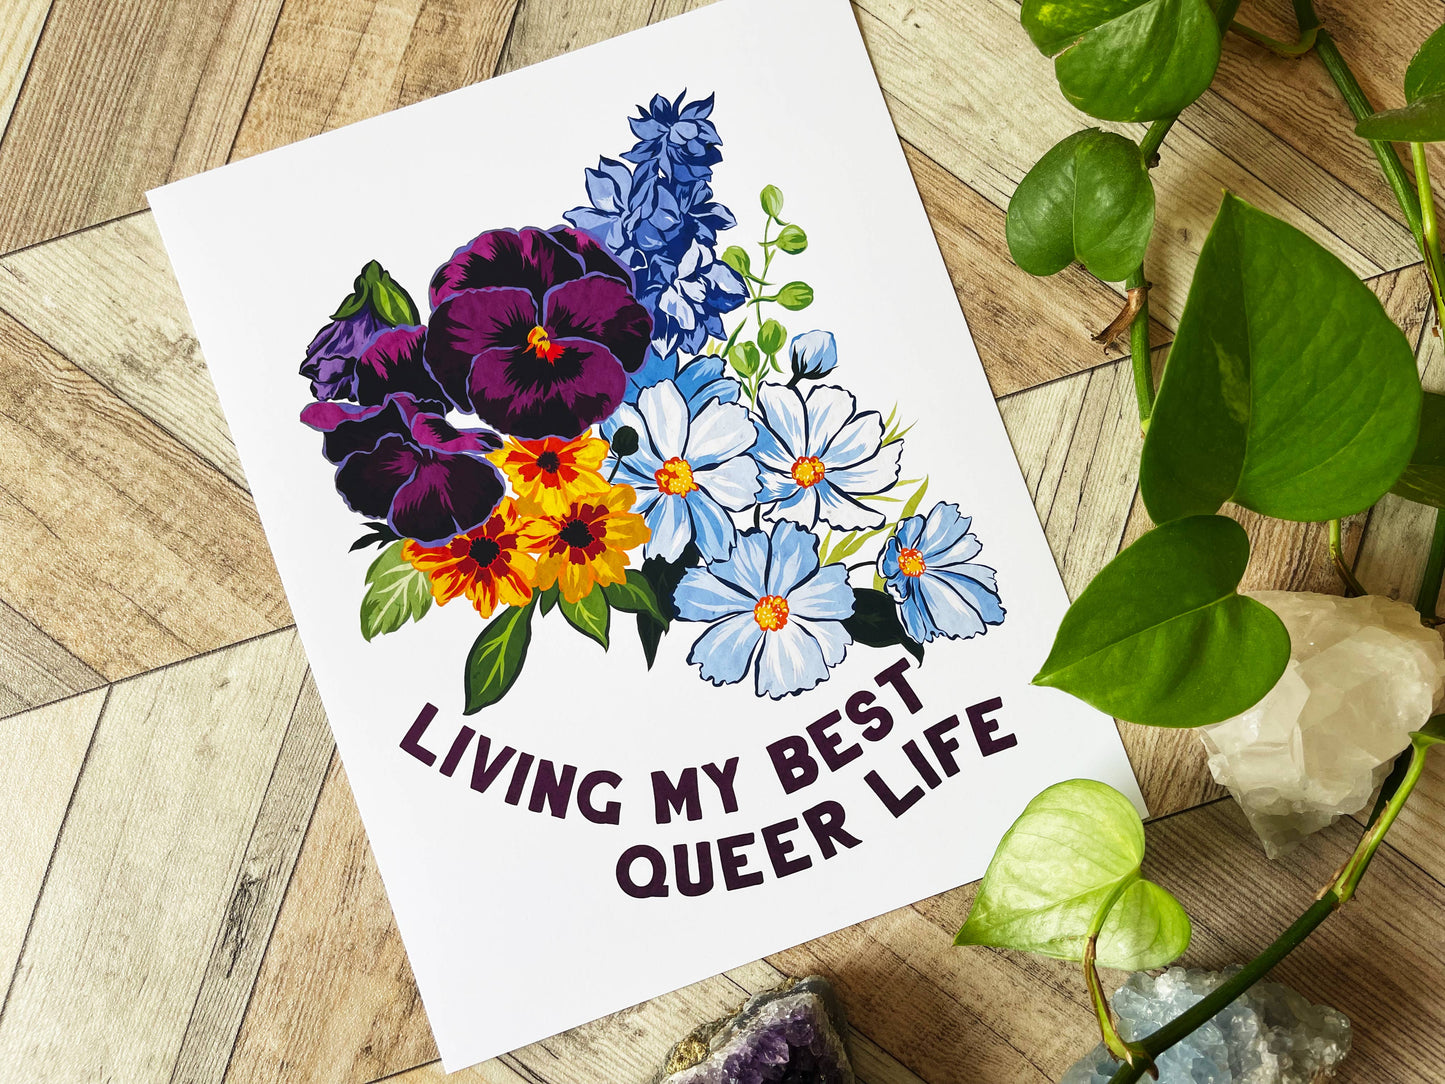 Living My Best Queer Life: LGBTQ Print